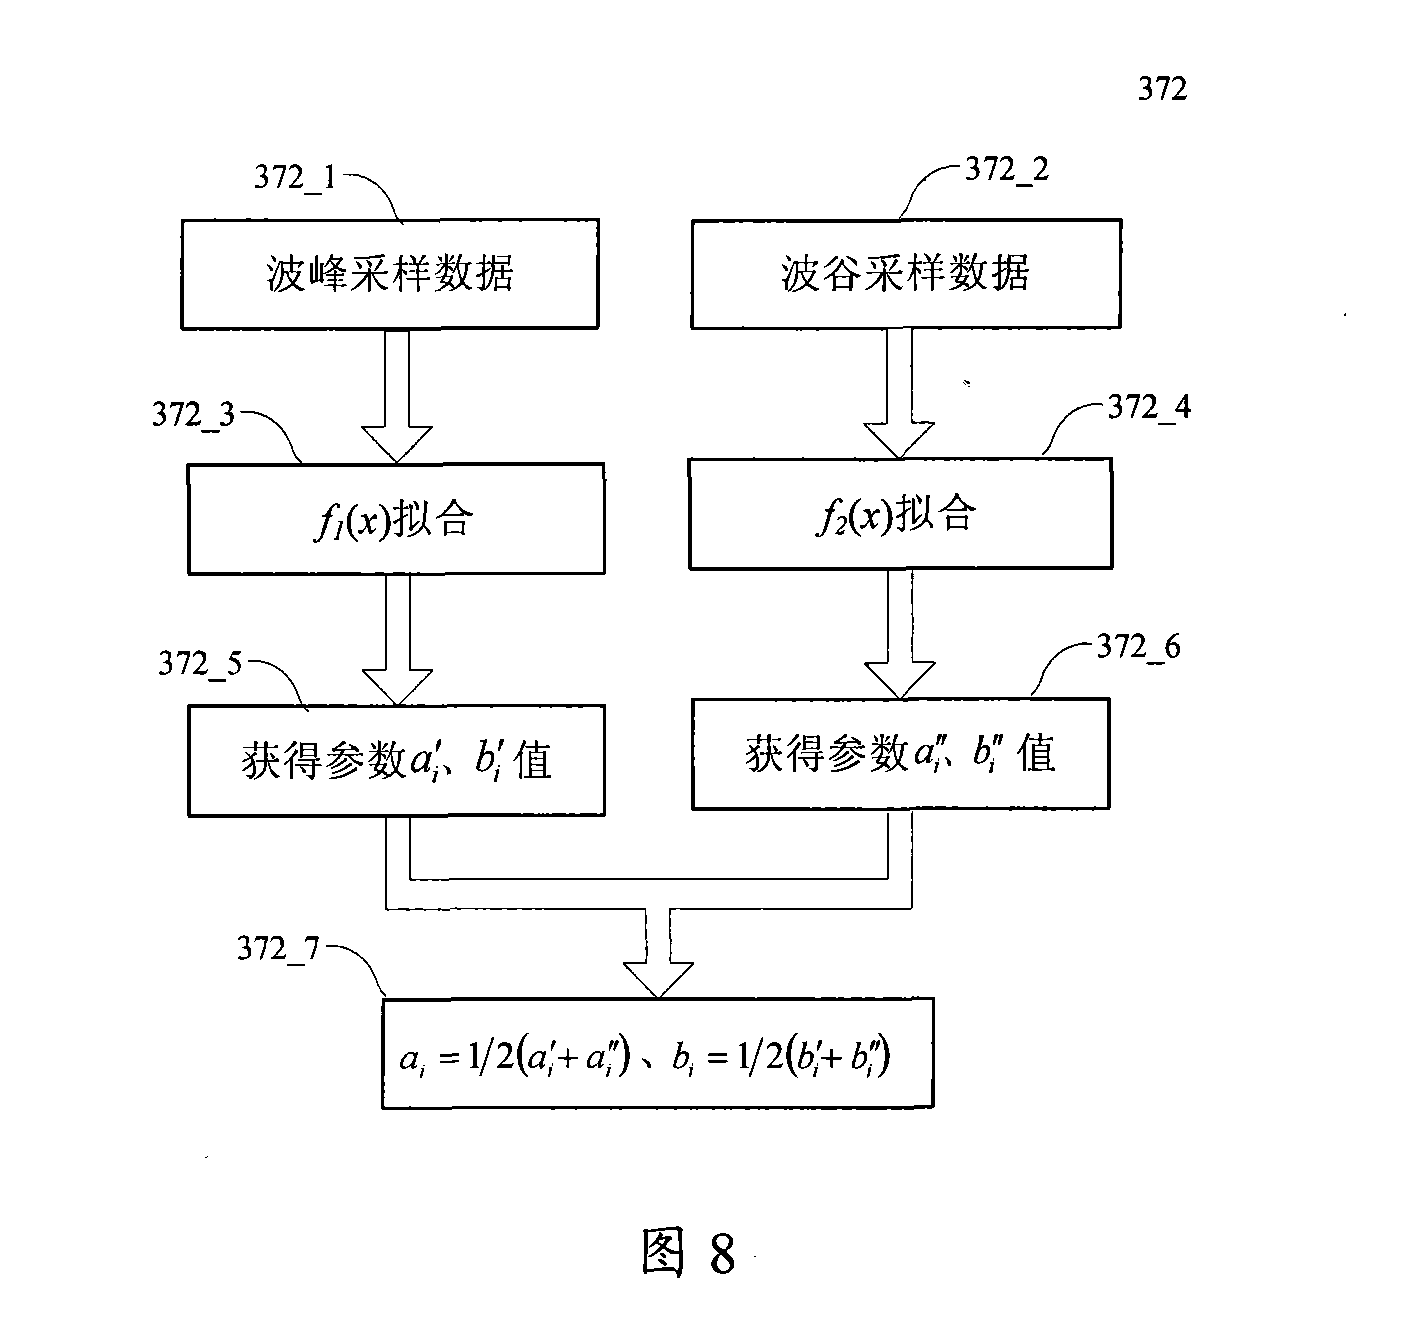 Silicon slice alignment signal collecting and processing system and processing method using the same